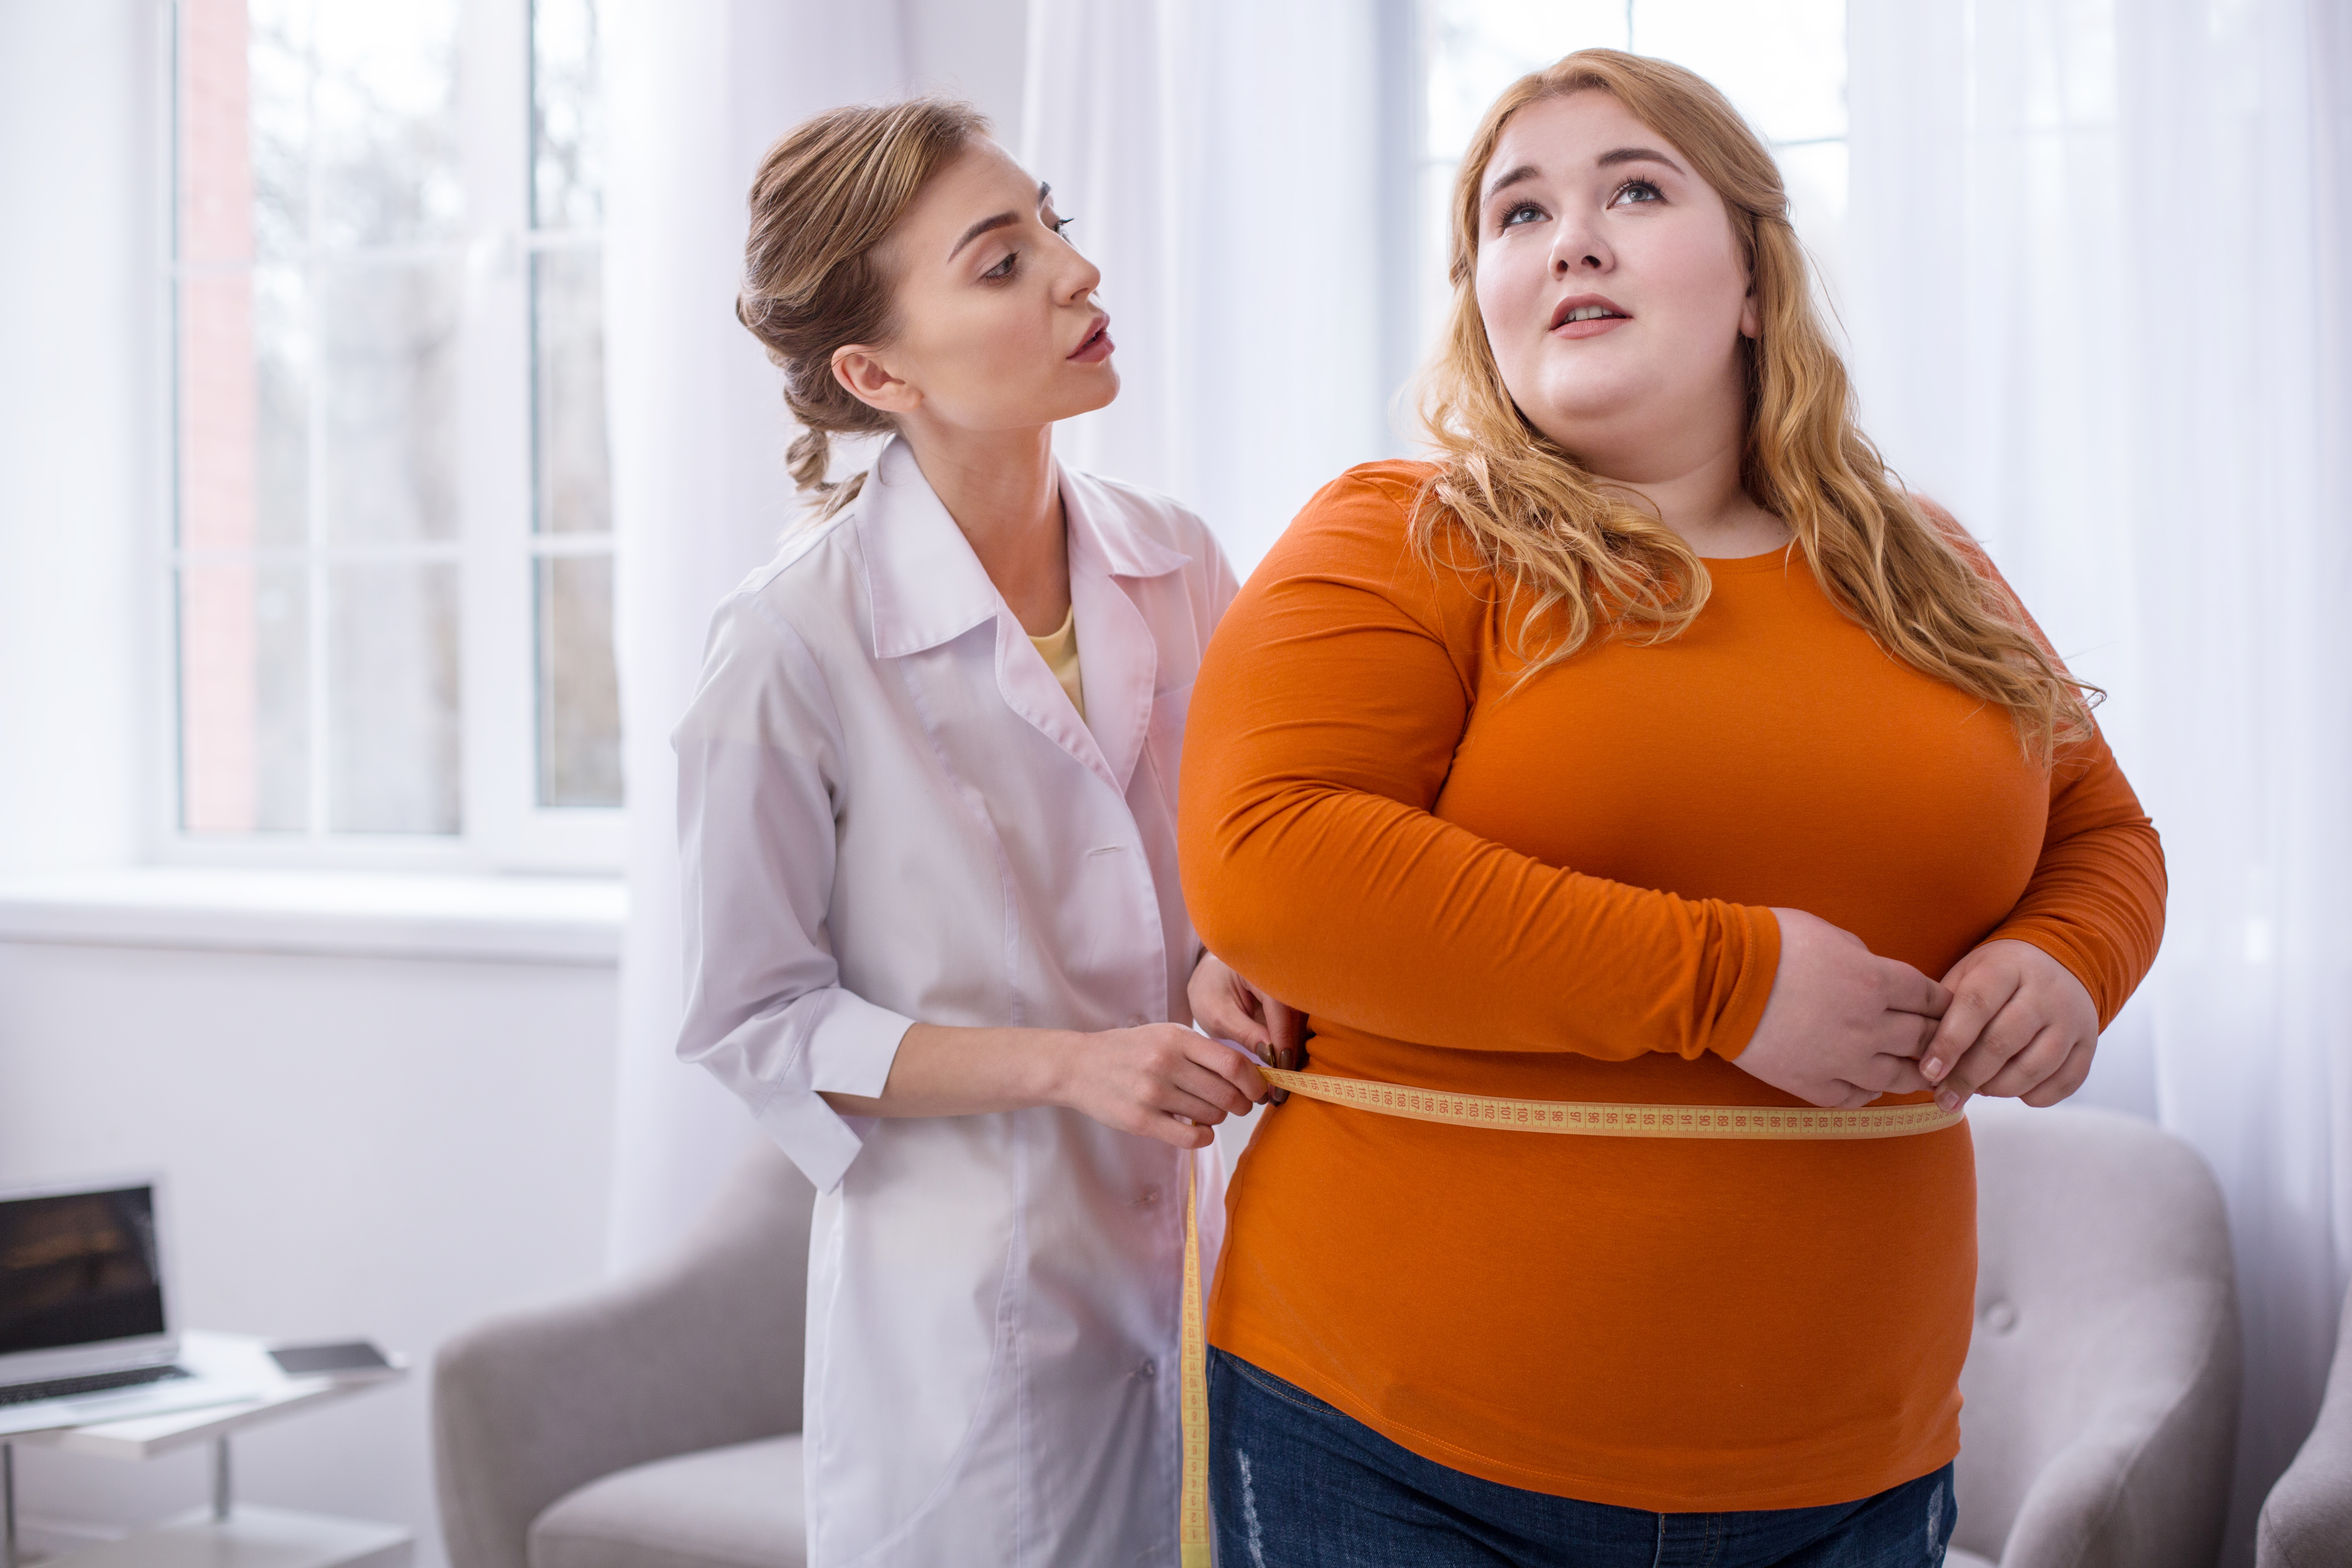 Is “Obese” a Medical Term or a Fat Shaming Slur?